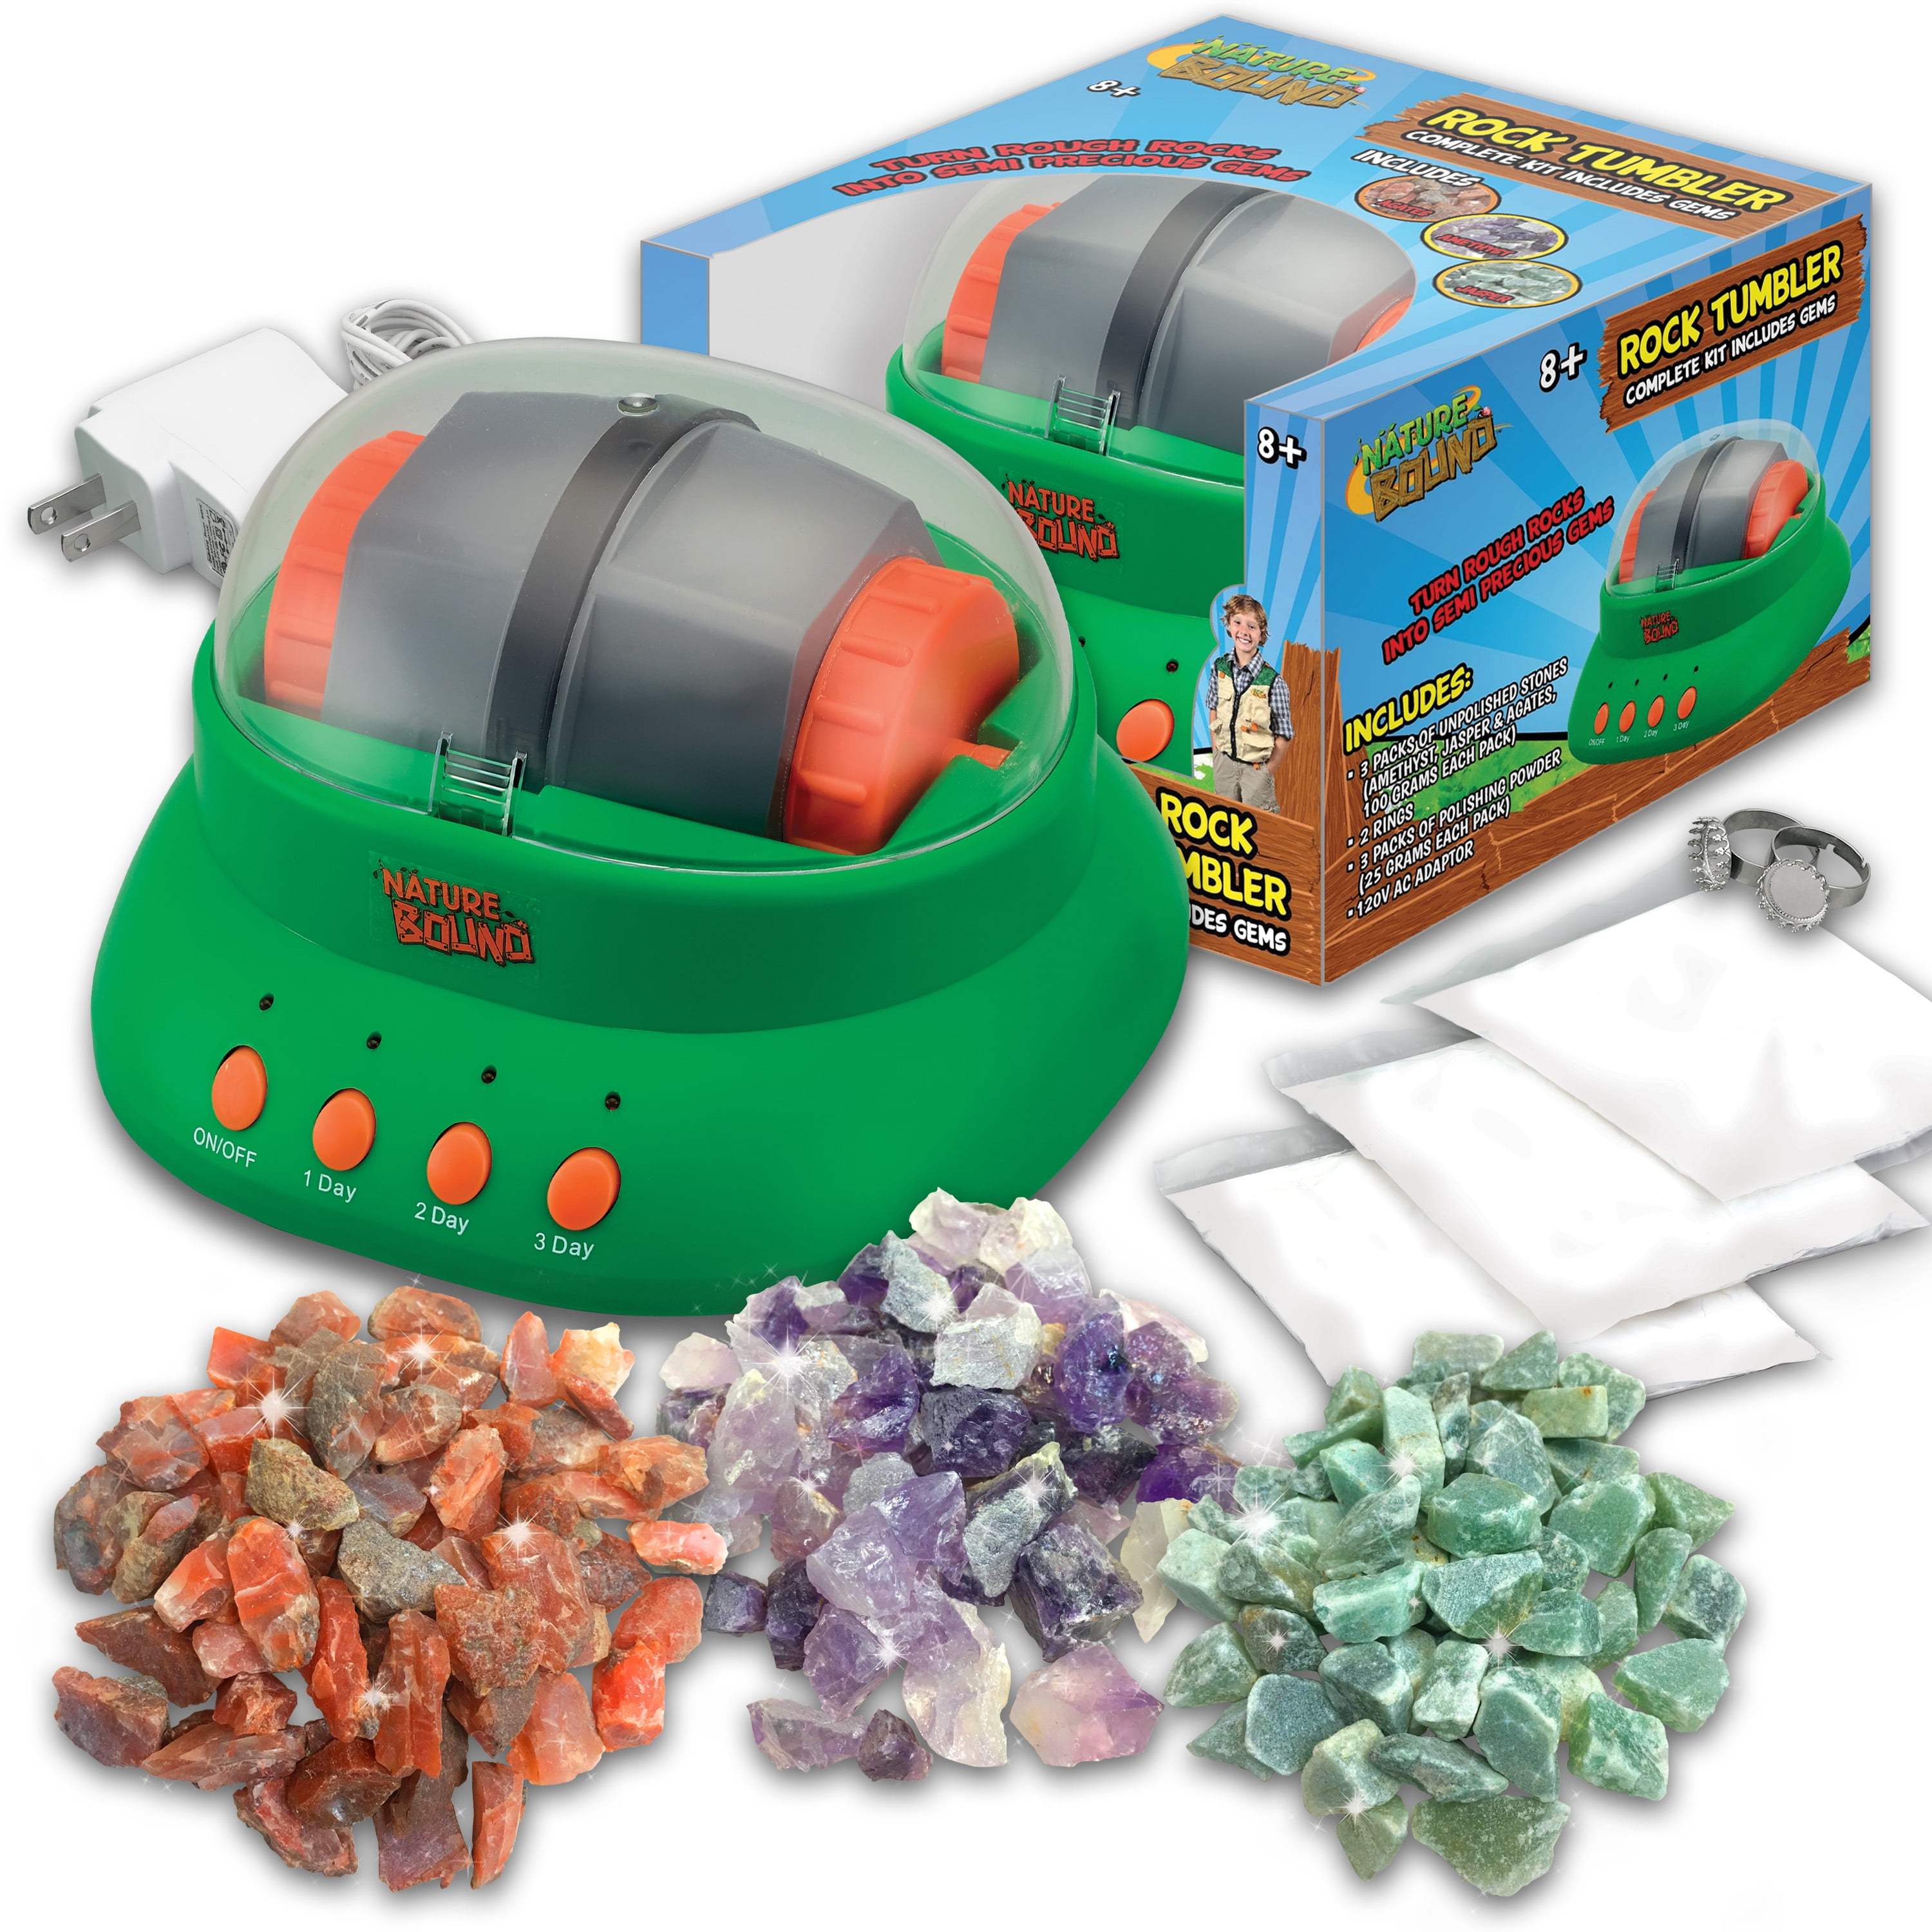 Rock Polisher with Rough Gemstones Rock Tumbler Kit Great Science Kit Gifts